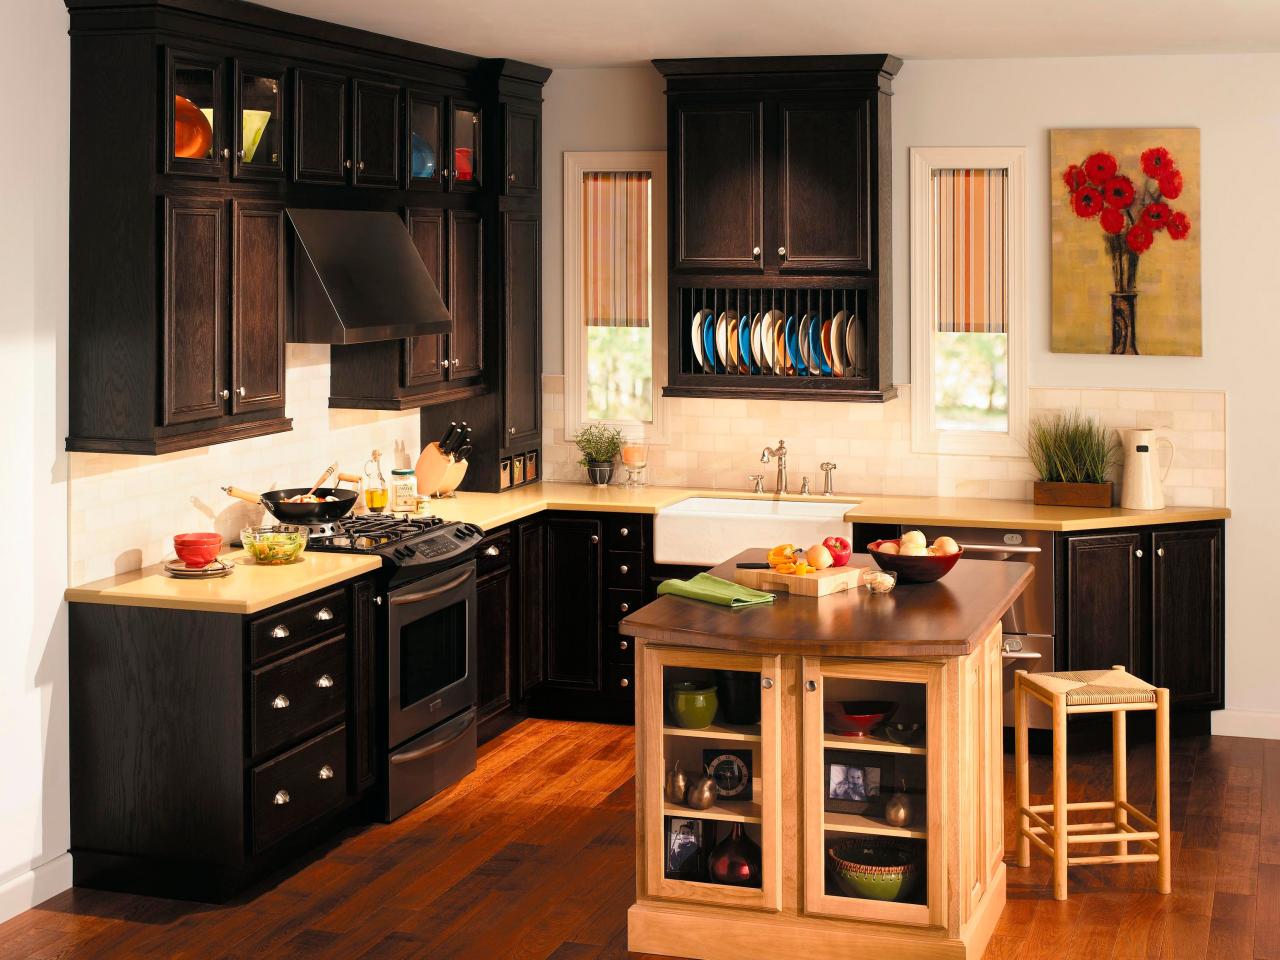 Cabinet Types Which Is Best For You, Types Of Modern Kitchen Cabinets